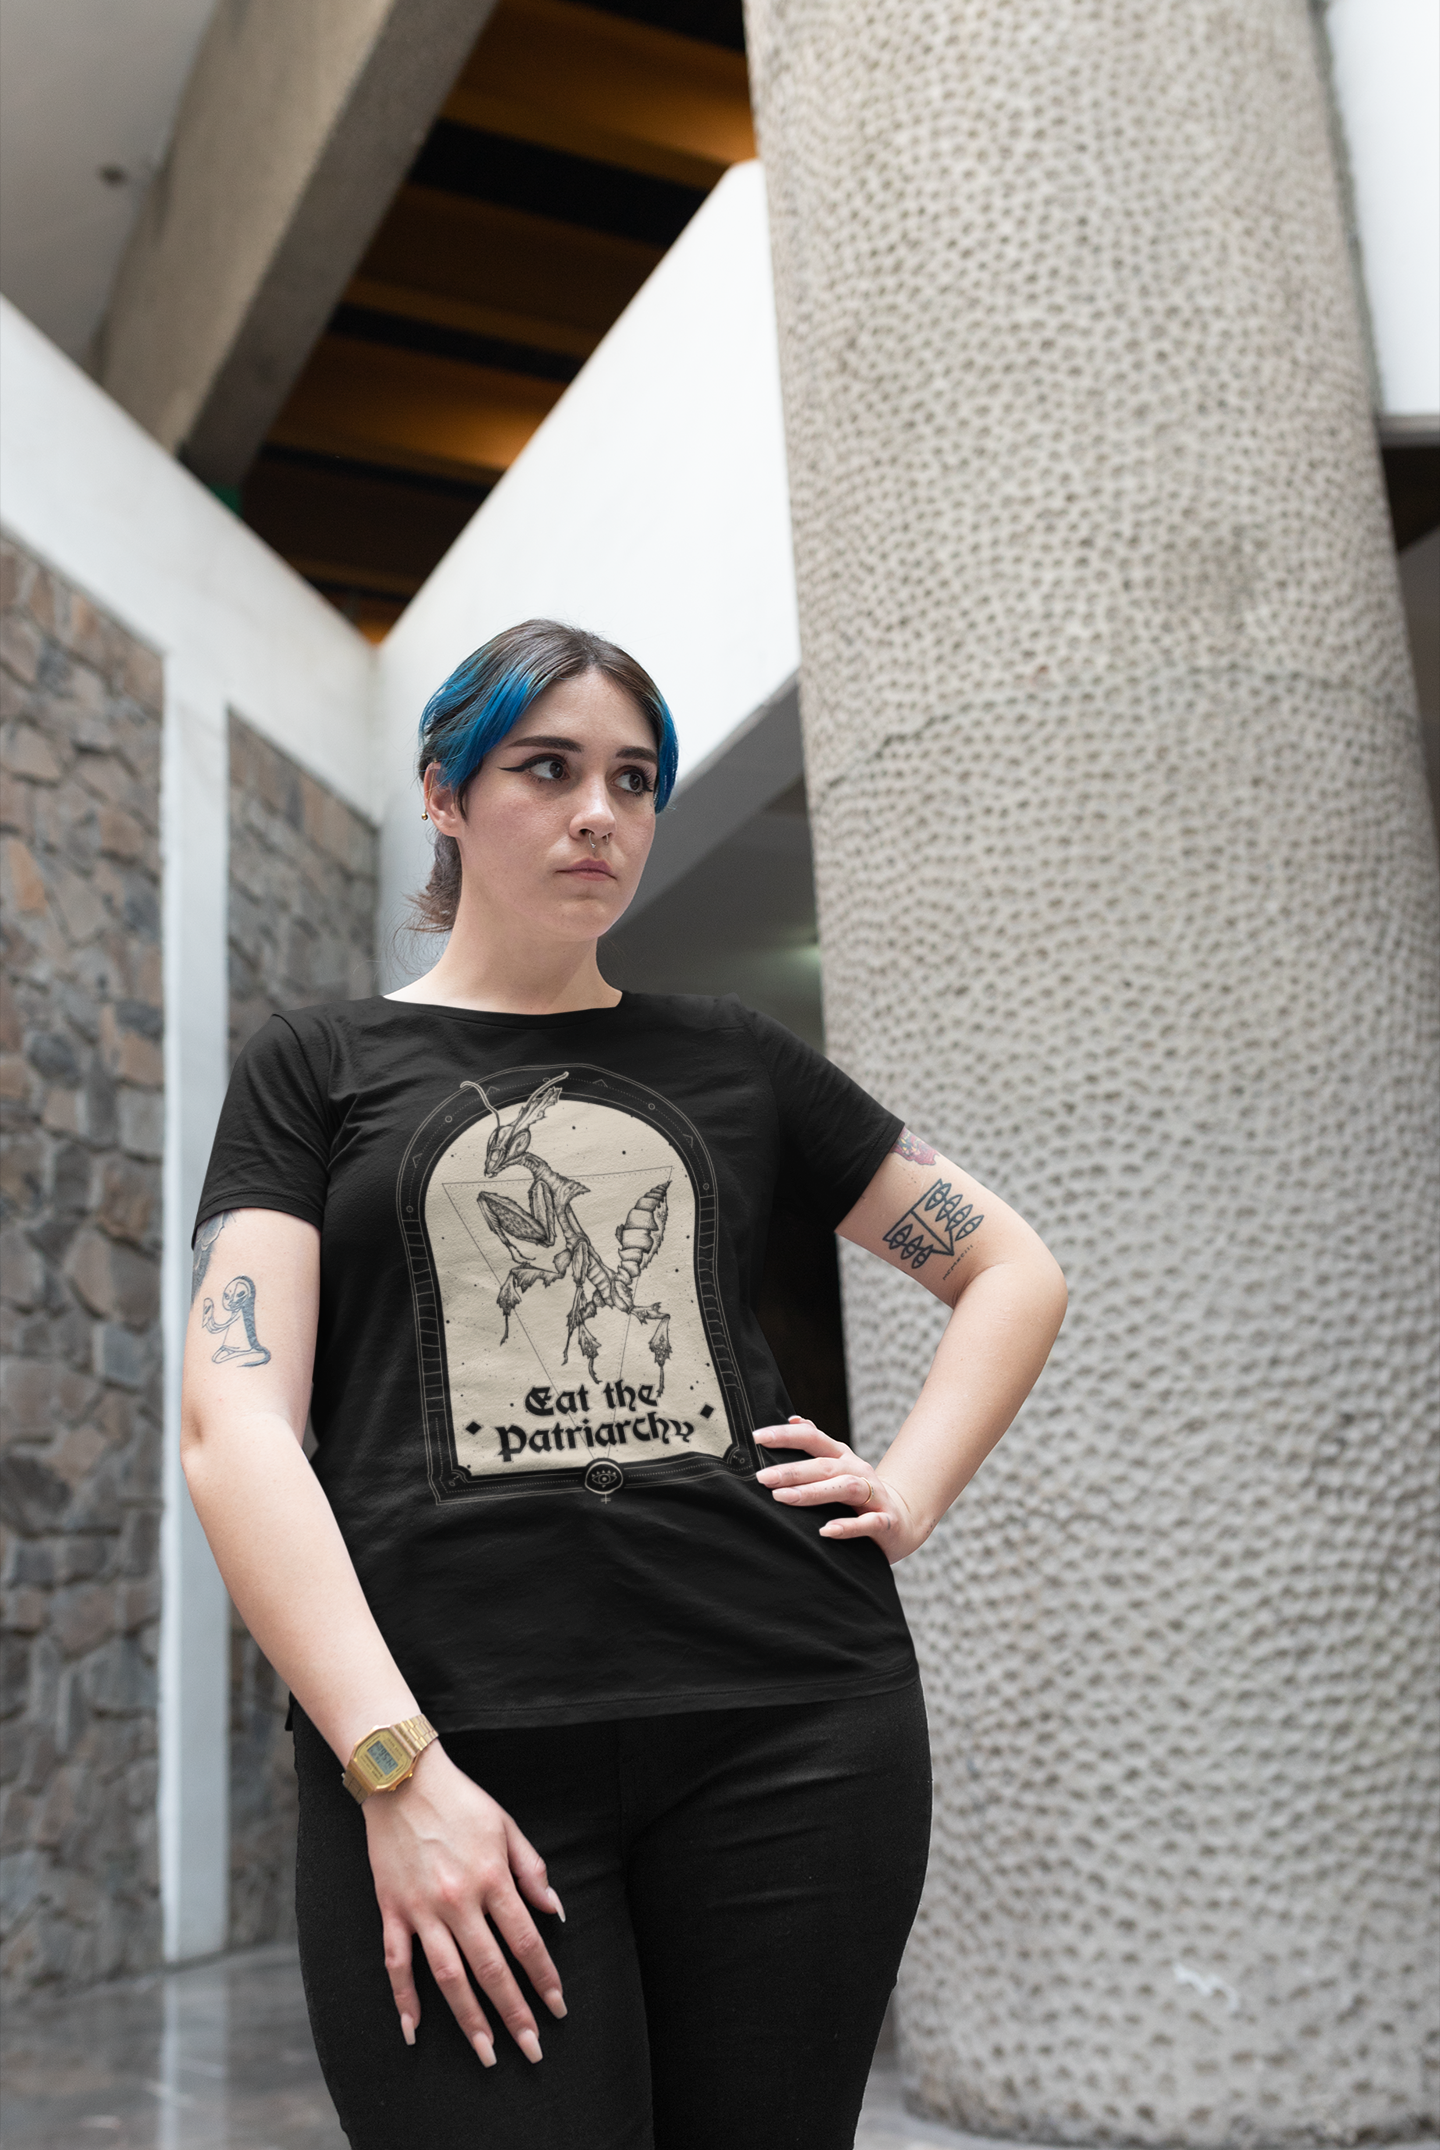 a tattoed young adult woman with blue hair and black cat-eye eyeliner wearing a goth black thirt with a witchy feminist praying mantis illustration that says "eat the patriarchy"